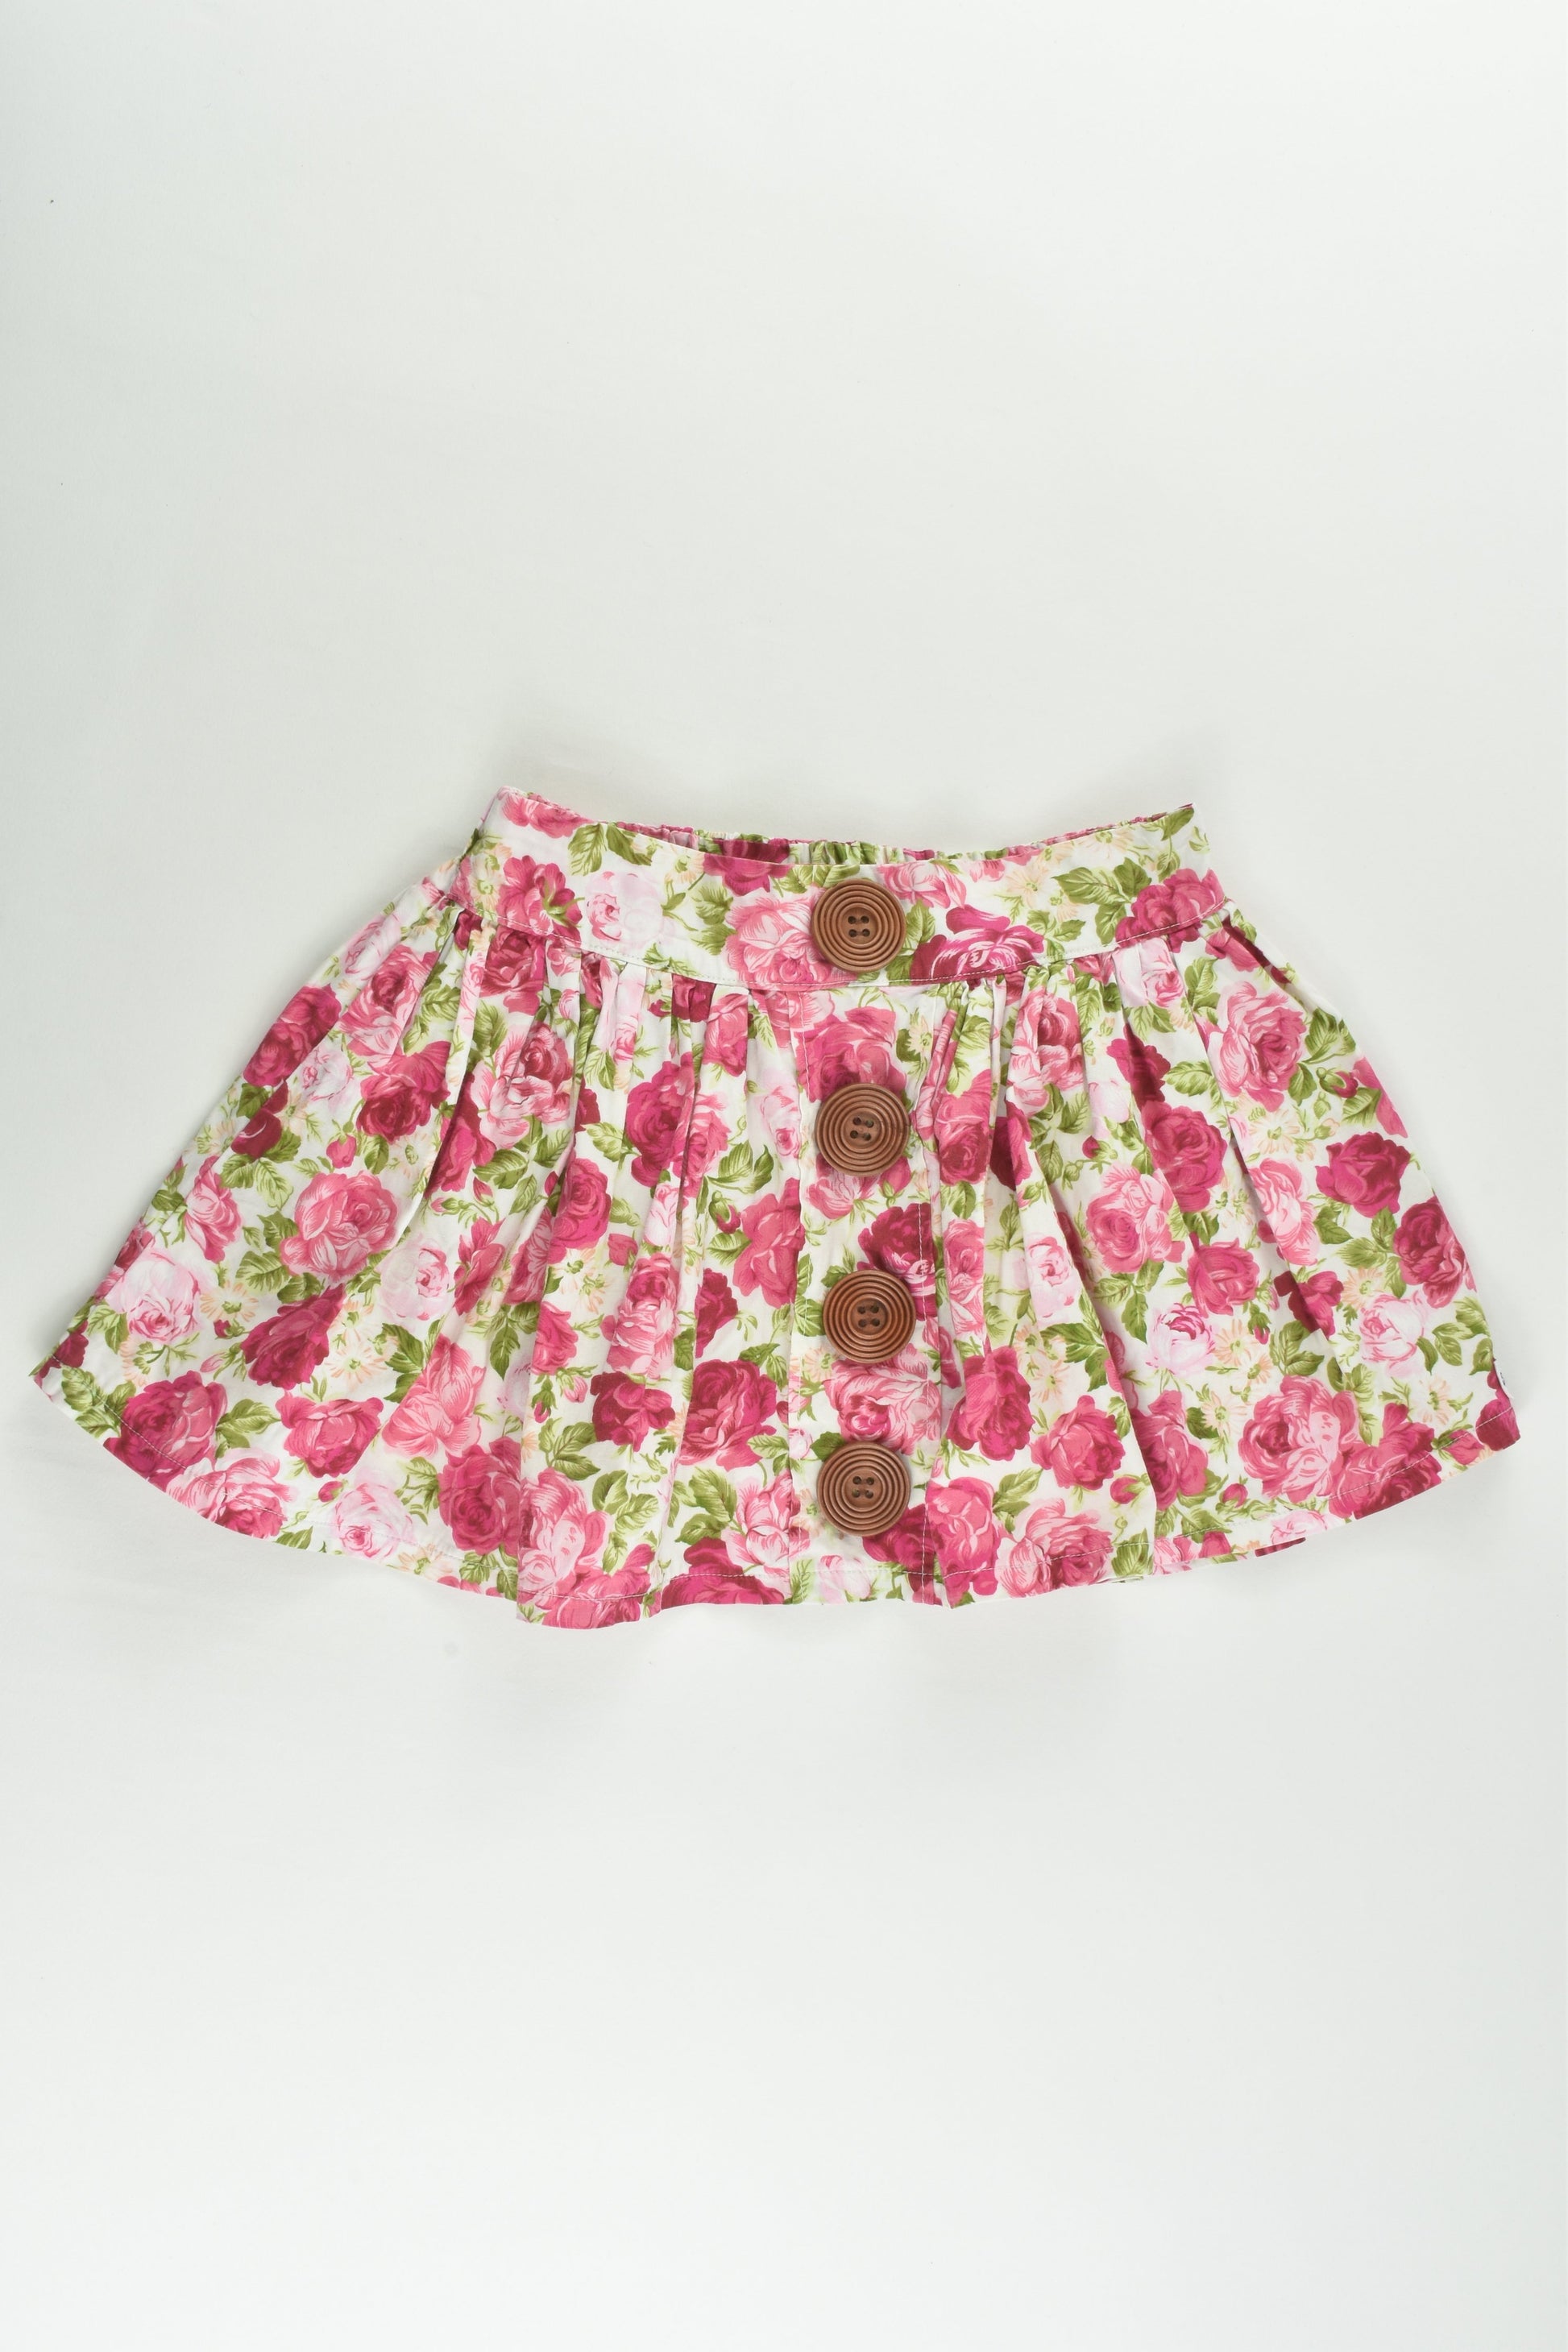 Miss B Boutique (AU) Size 2 Floral Skirt with Wooden Buttons